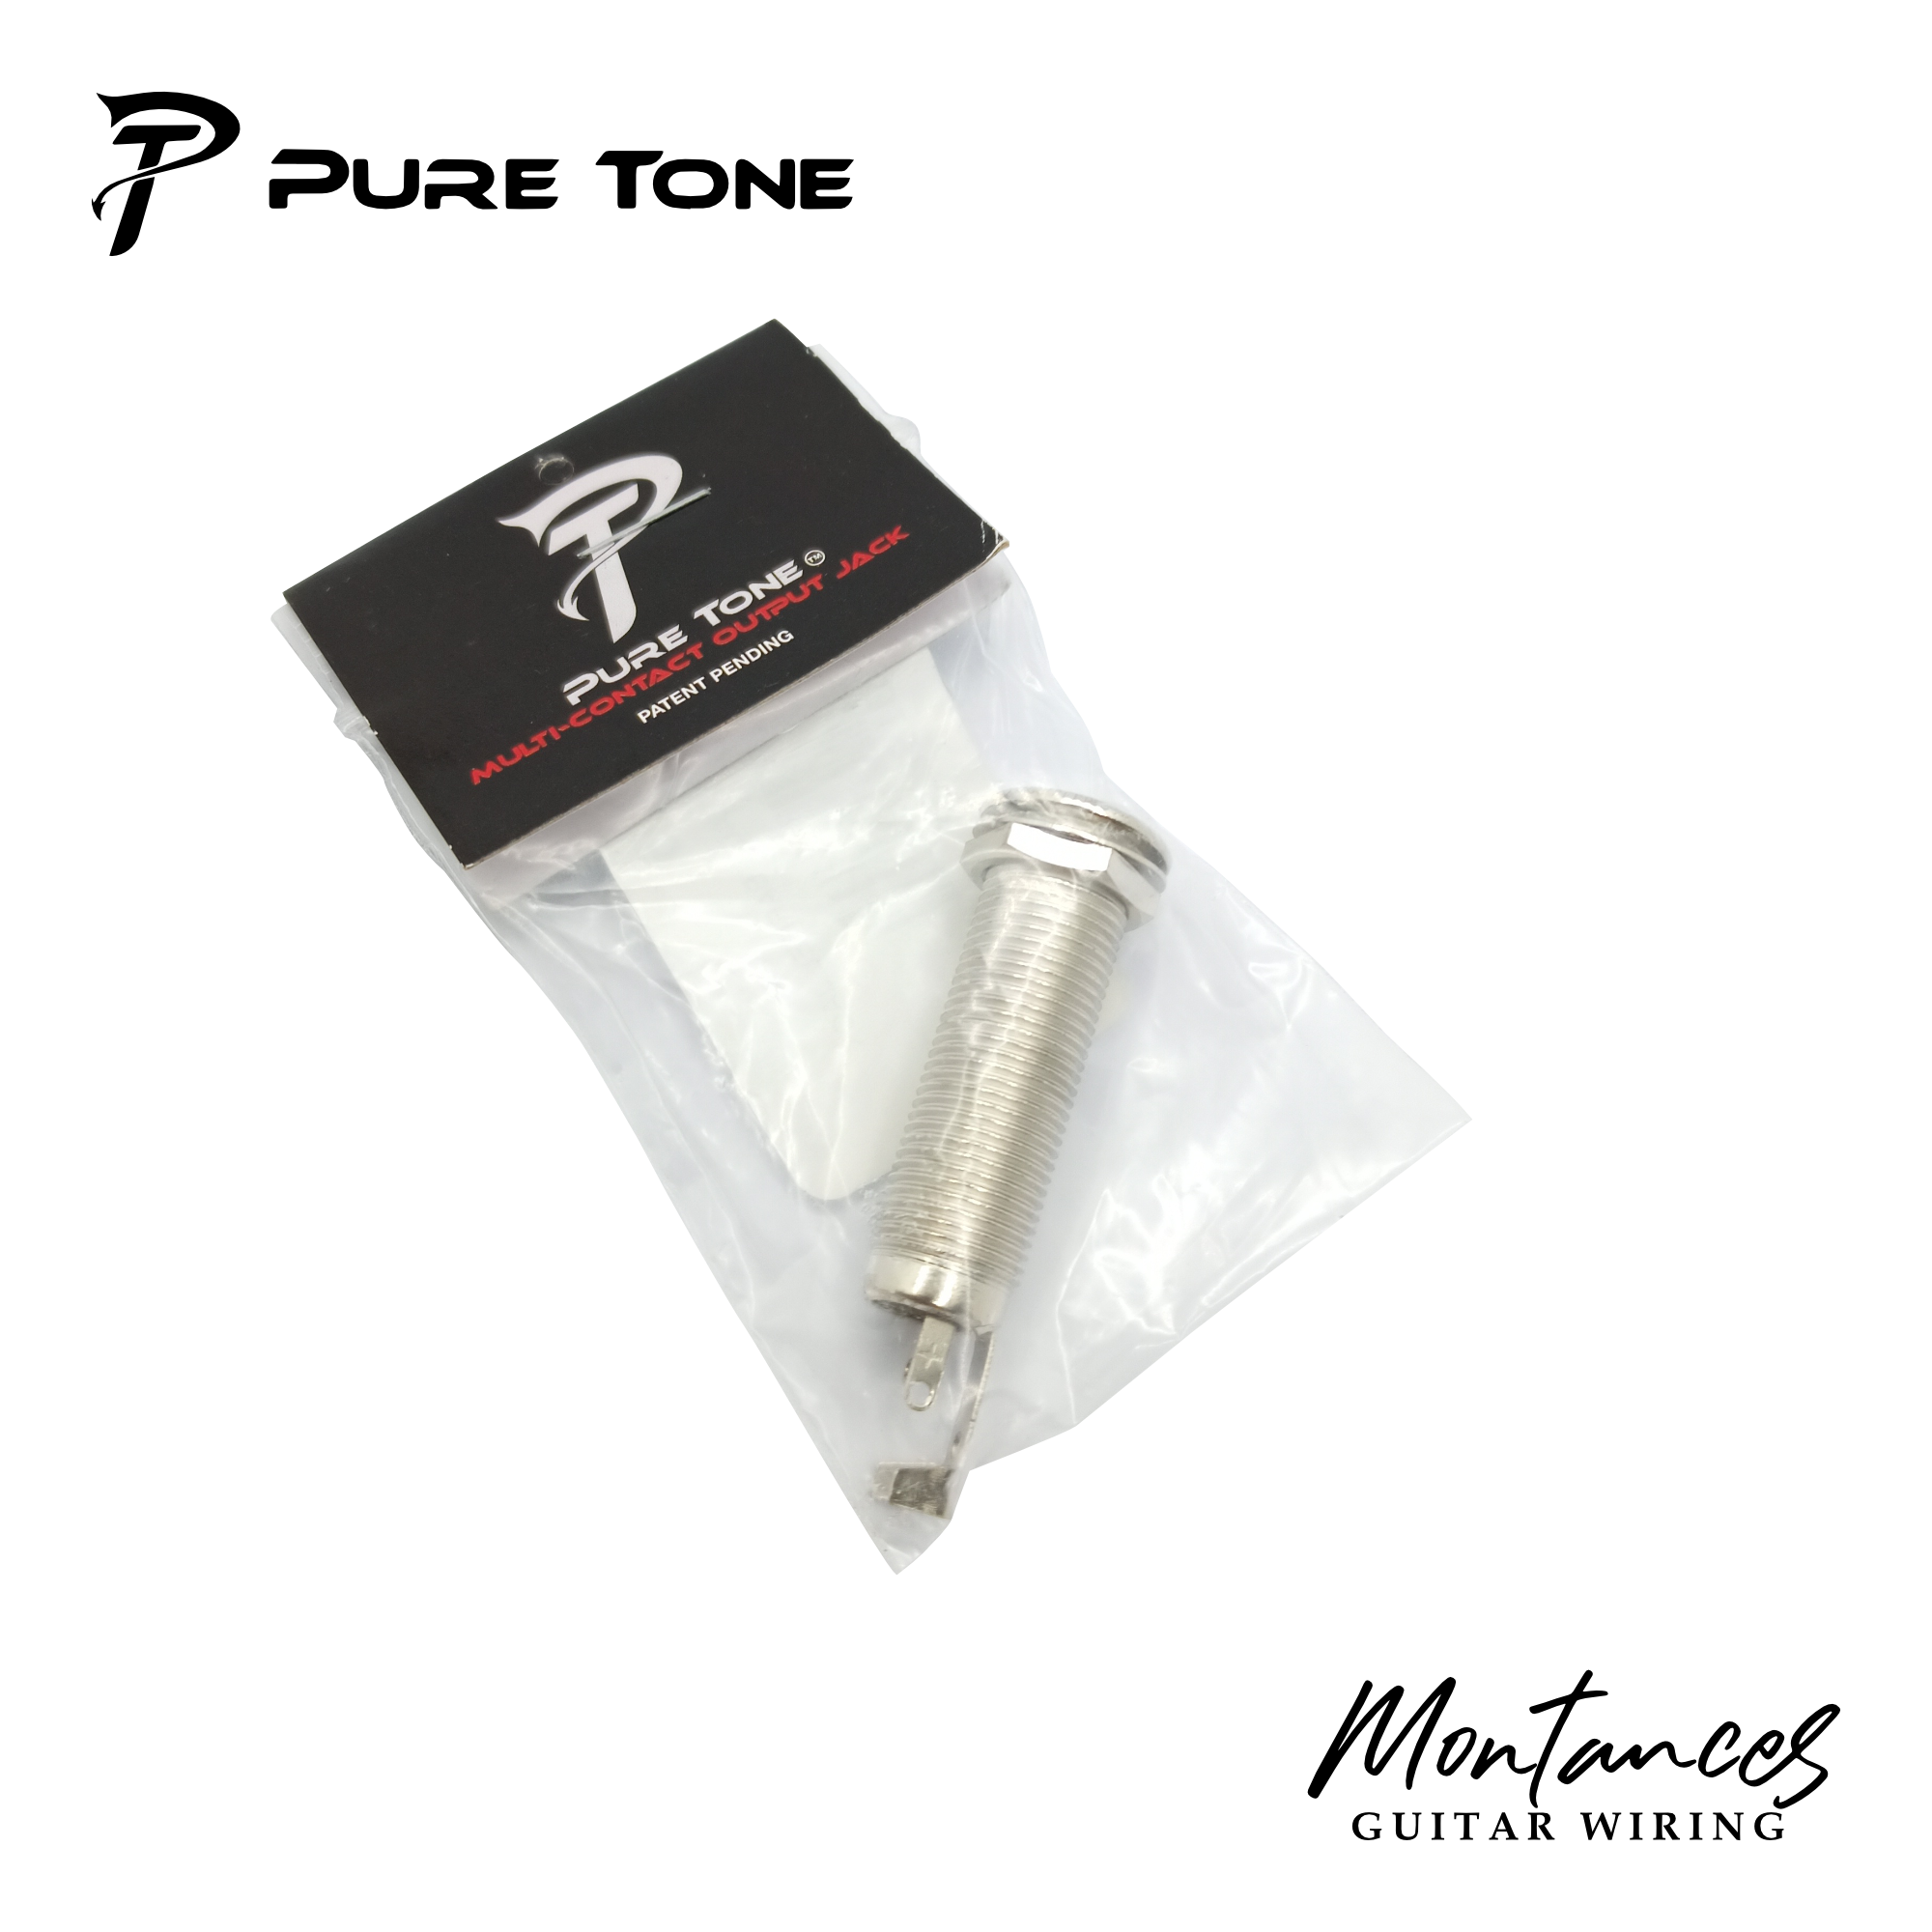 Pure Tone® Stereo Barrel Type Multi-Contact Ouput Jack Made in USA